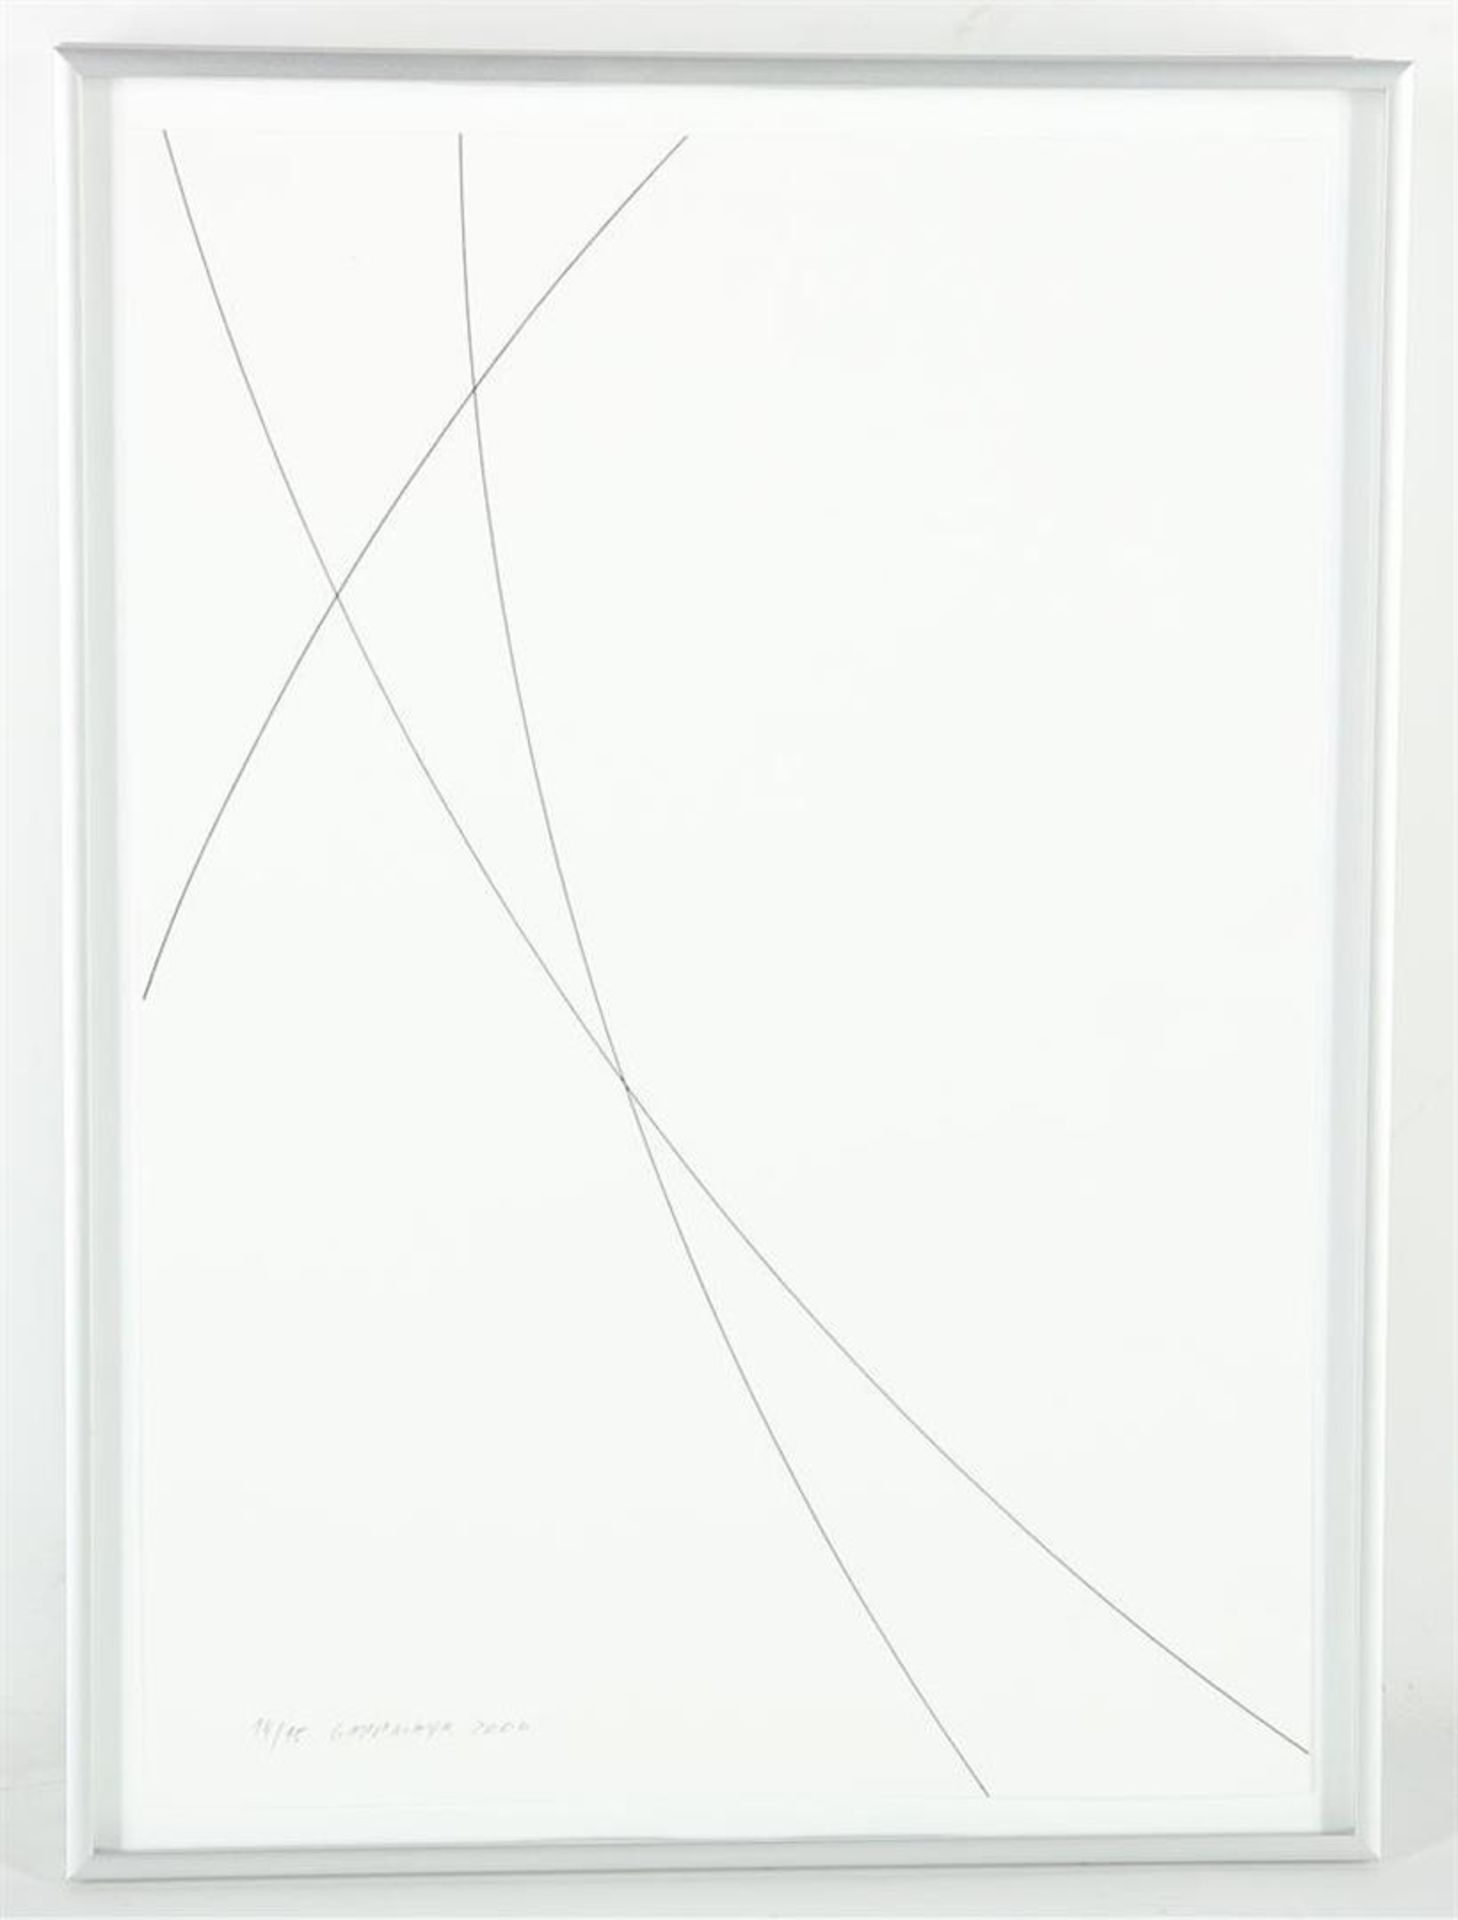 Heinz Gappmayr (1925-2010) series of 5 abstracts, signed lower right and dated 2000, all numbered - Image 10 of 12